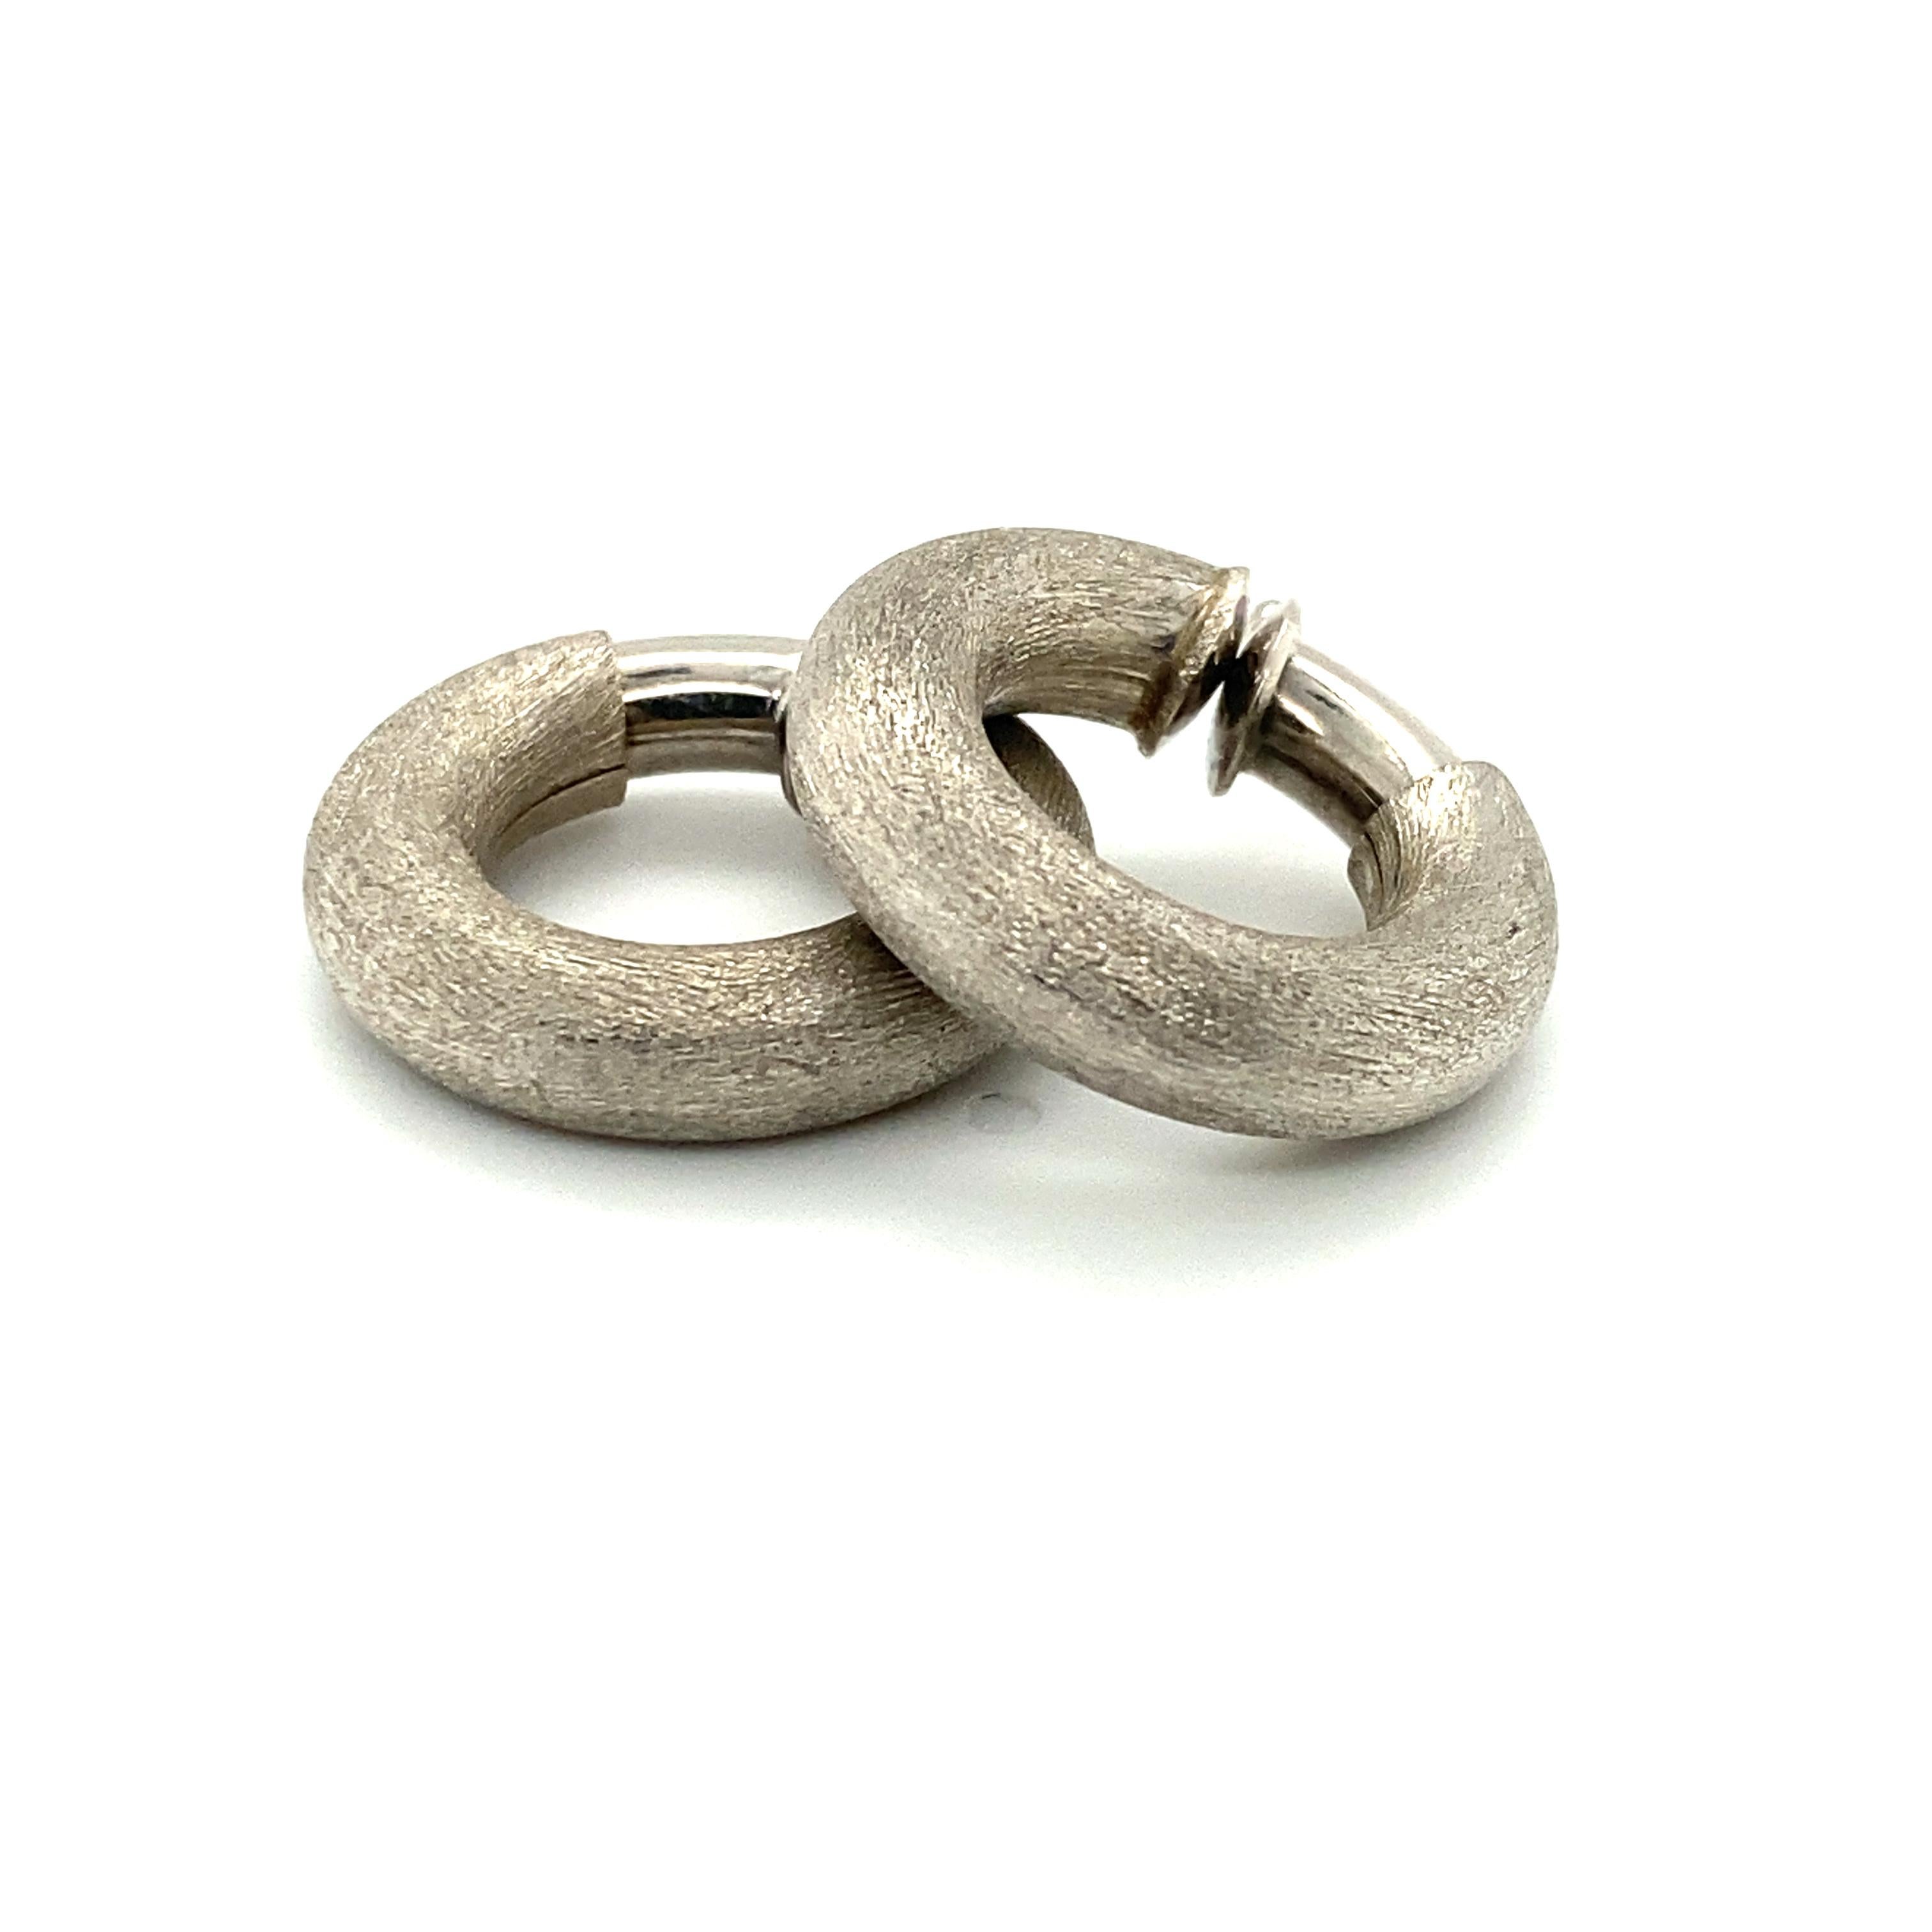 A pair of textured Italian 18k white gold hoop earrings from OWC.  This pair would have been individually textured using a hand tool in a labor-intensive process, and the resulting texture scatters light in such a way that parts of the surface